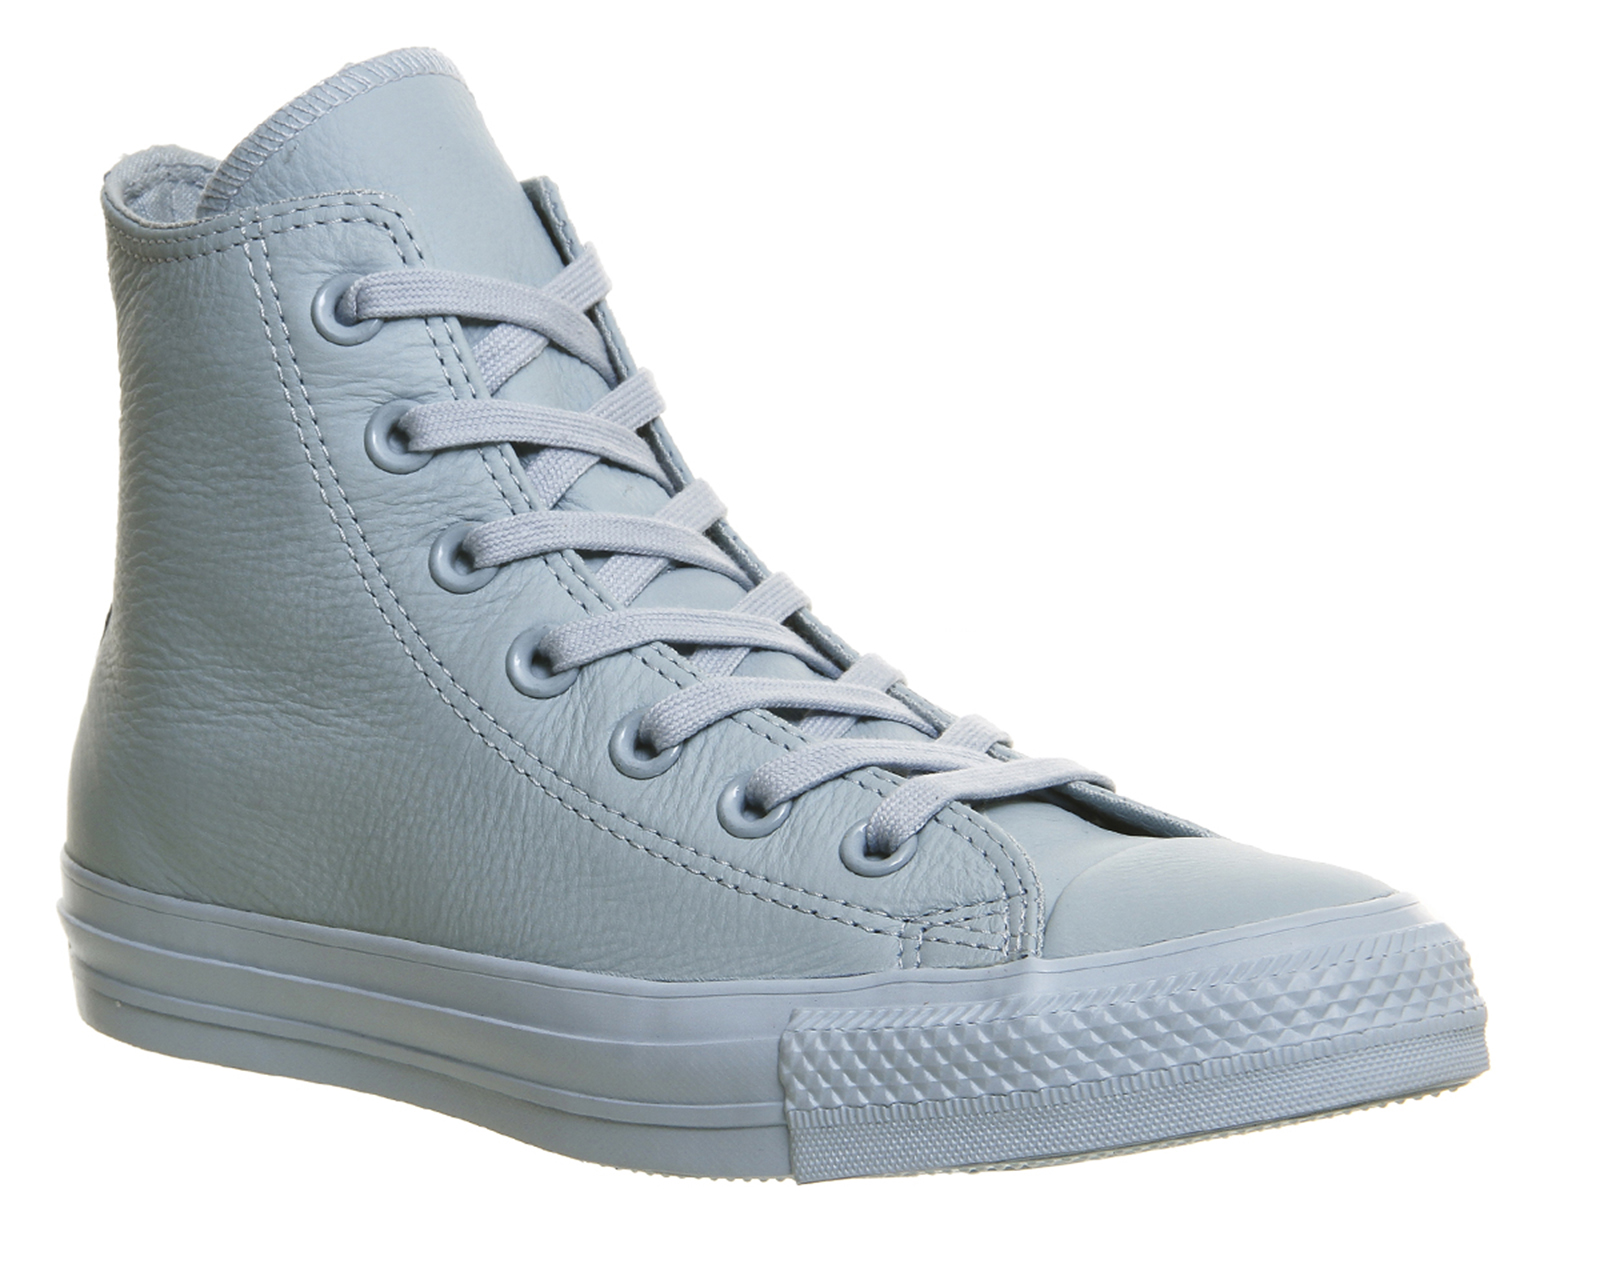 ConverseAll Star Hi LeatherBaby Blue 